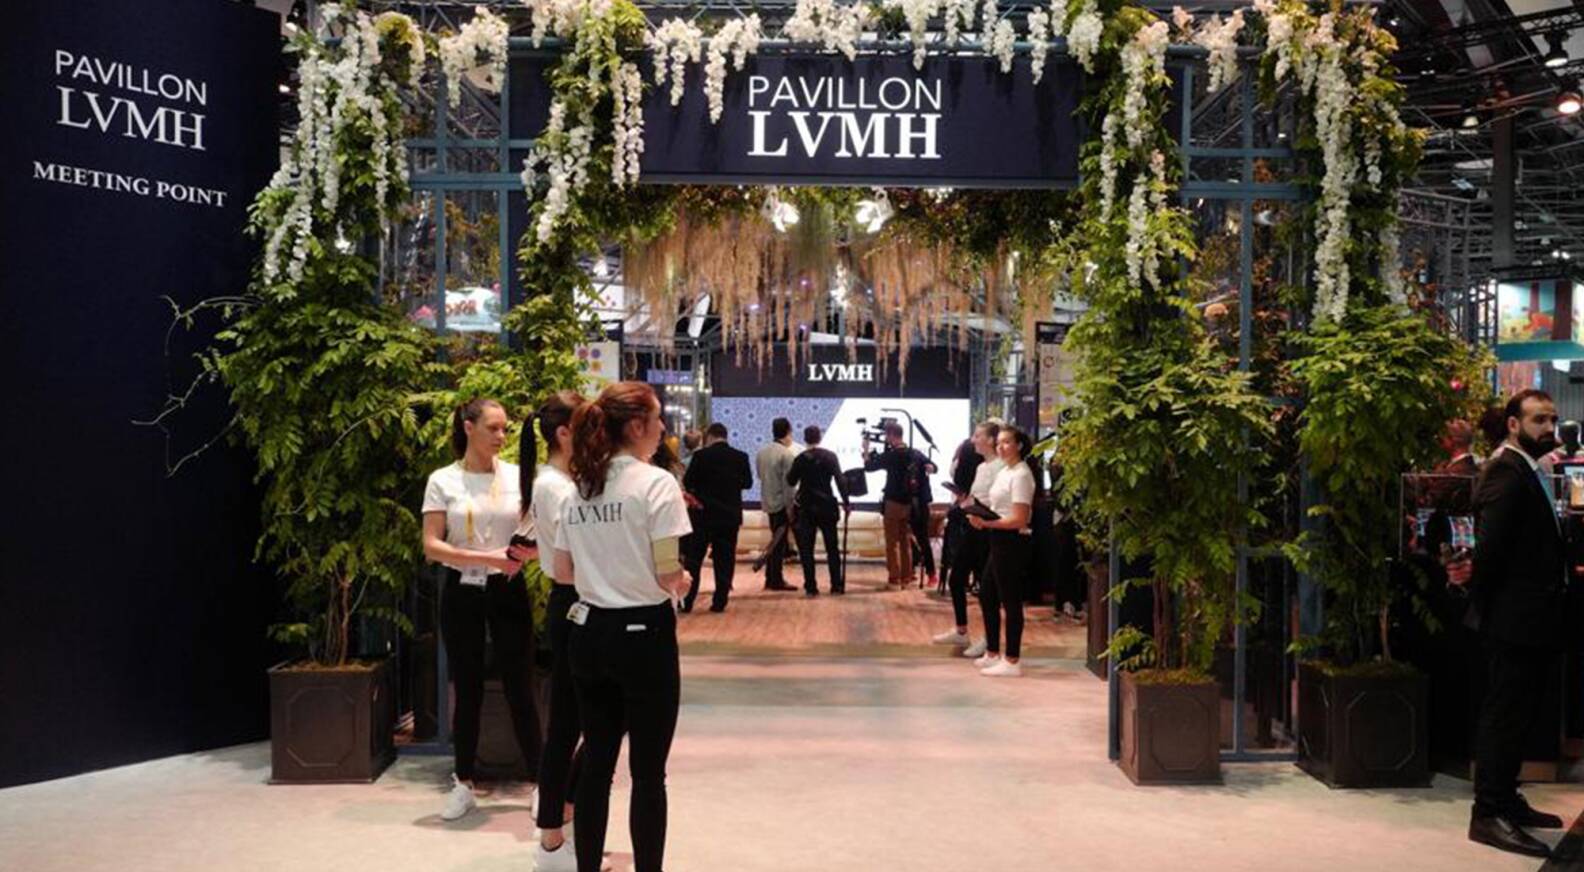 LVMH Innovation Award: discover the 30 finalist startups that will showcase  their solutions in the LVMH Luxury Lab at Viva Technology 2019 - LVMH